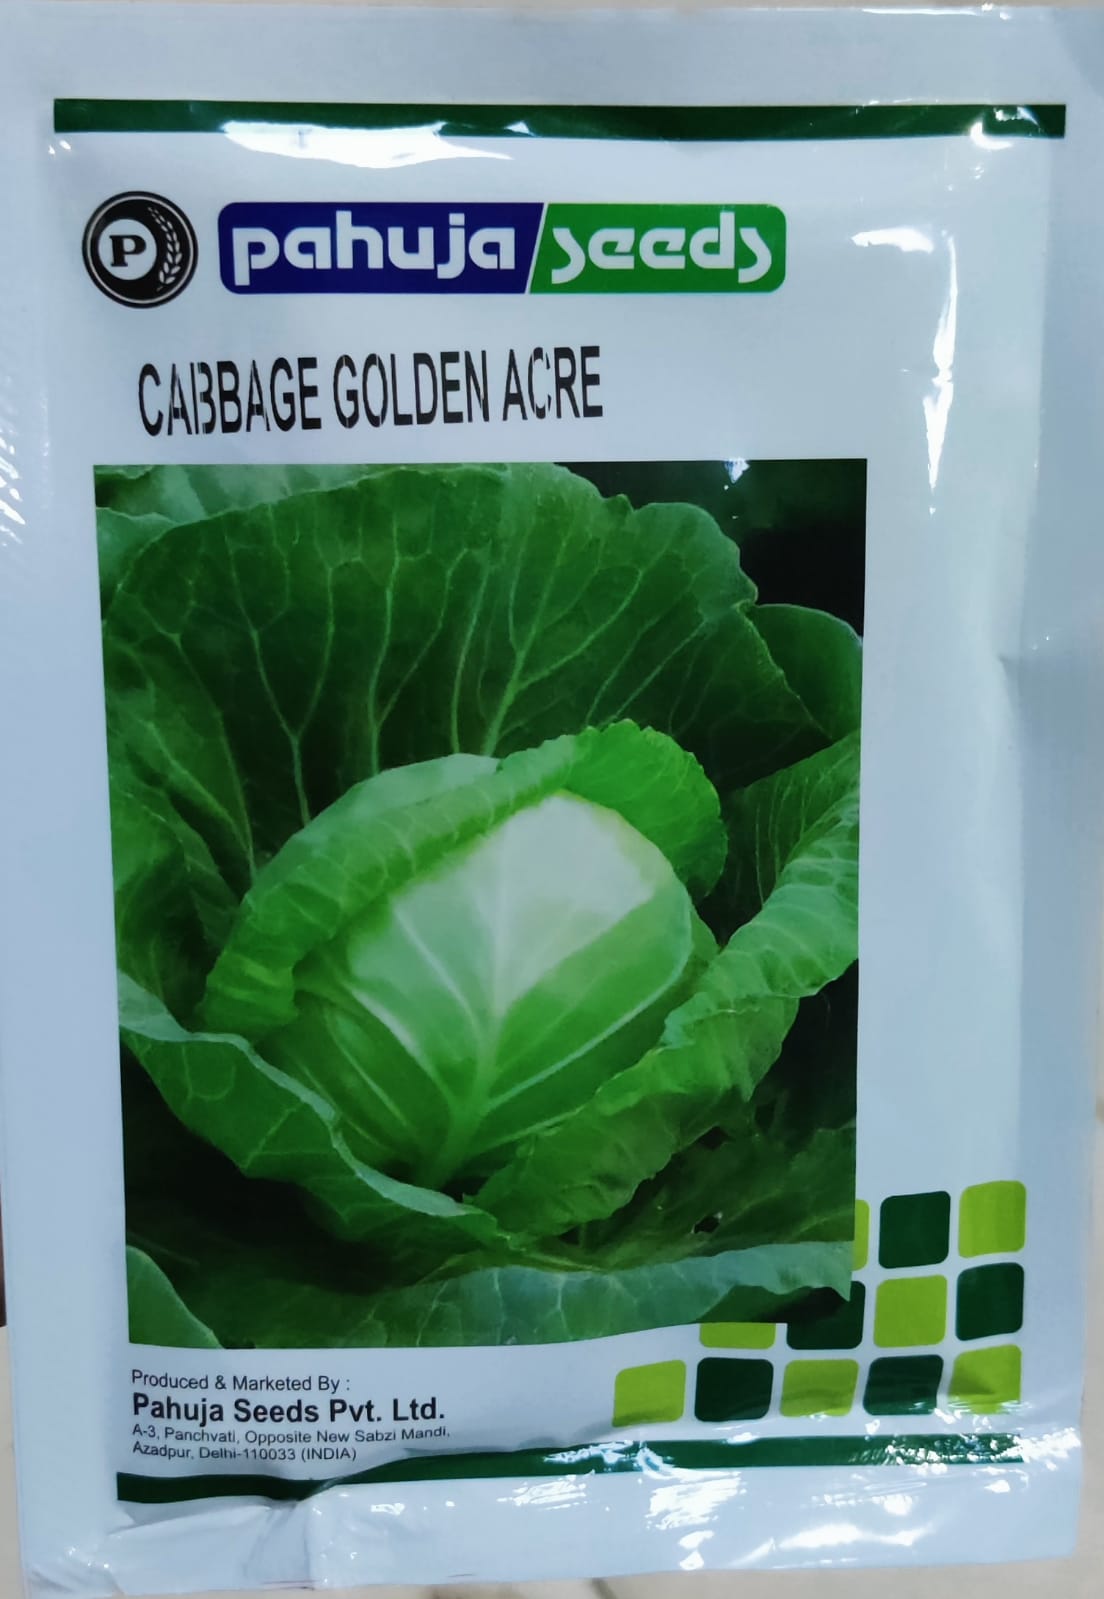 Cabbage Golden Acre (Pahuja Seeds)